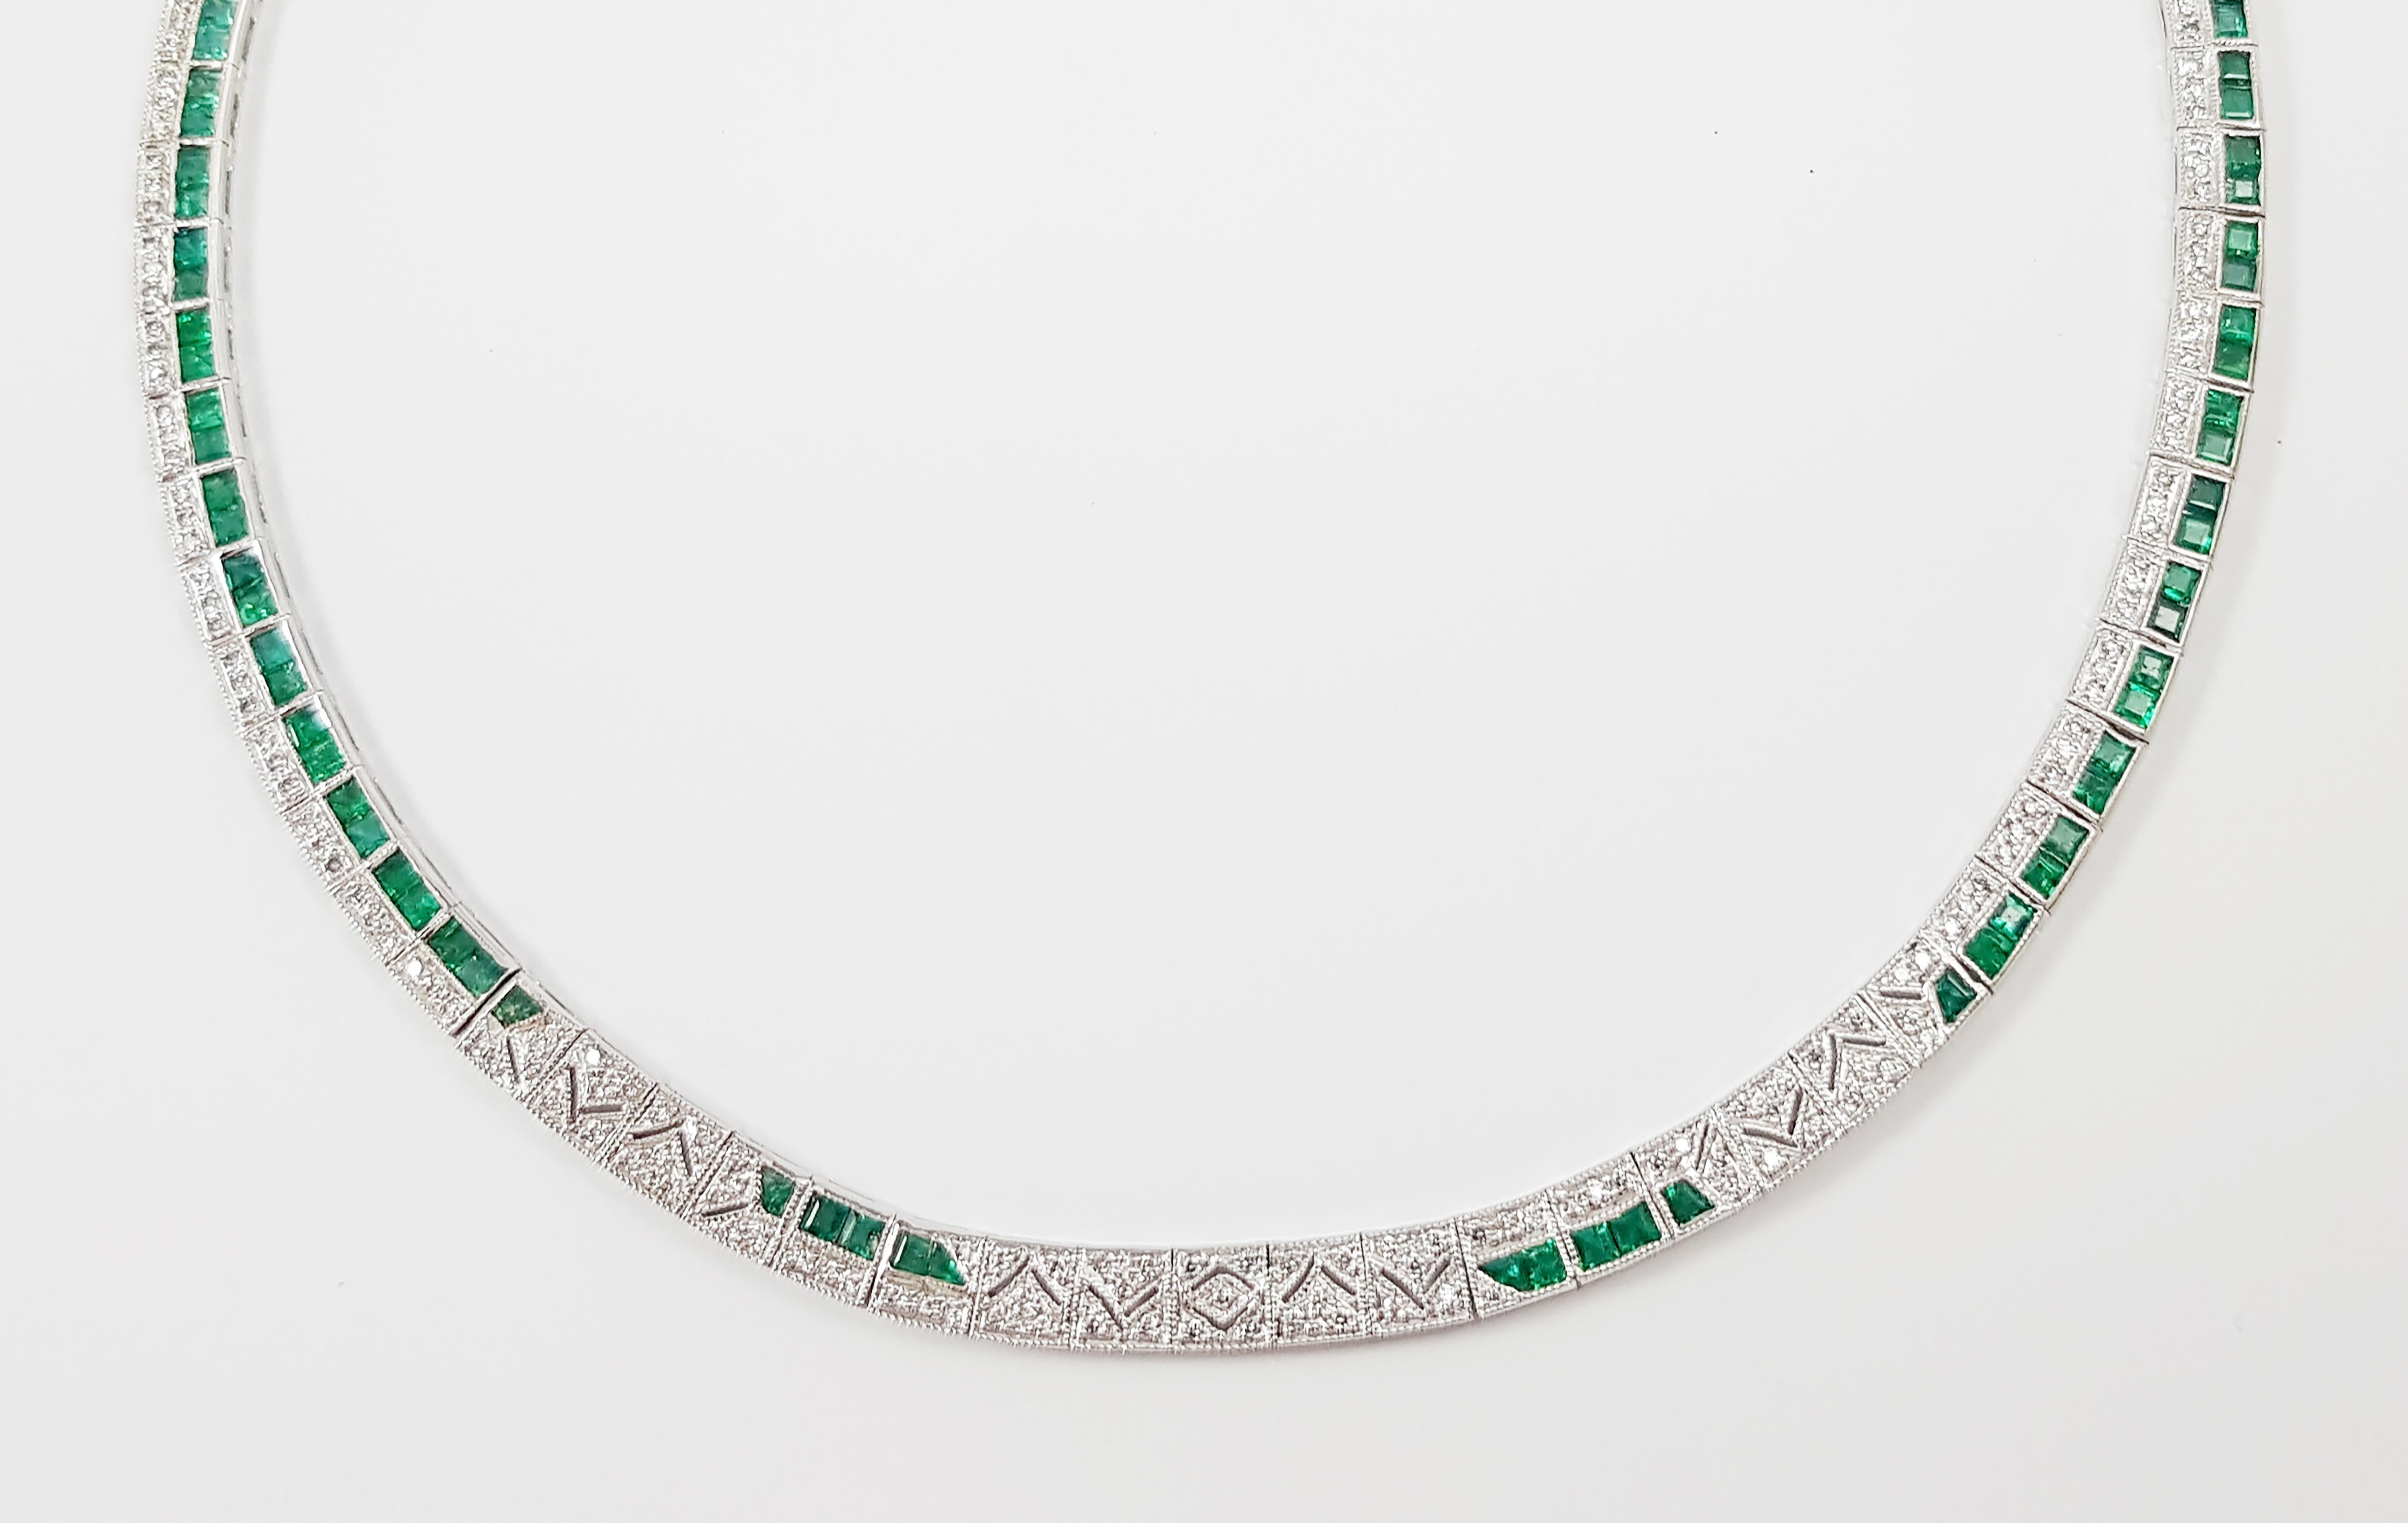 Emerald 6.02 carats with Diamond 1.25 carats Necklace set in 18 Karat White Gold Settings

Width:  0.5 cm 
Length: 42.50 cm
Total Weight: 41.48 grams

